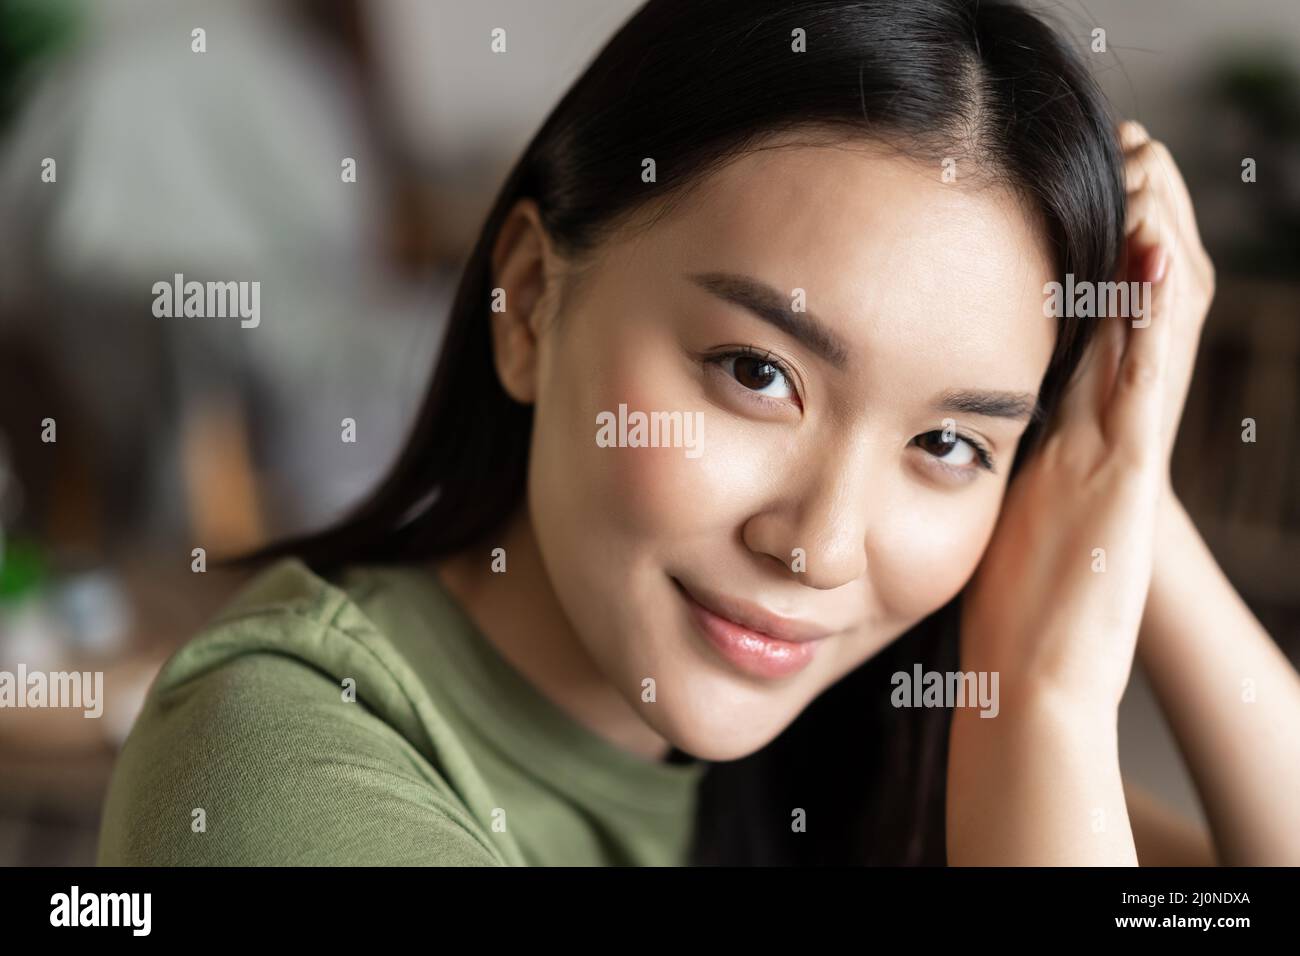 Close up portrait of tender asian girl with glowing natural skin, smiling sensual at camera, sitting at home in cozy clothes Stock Photo